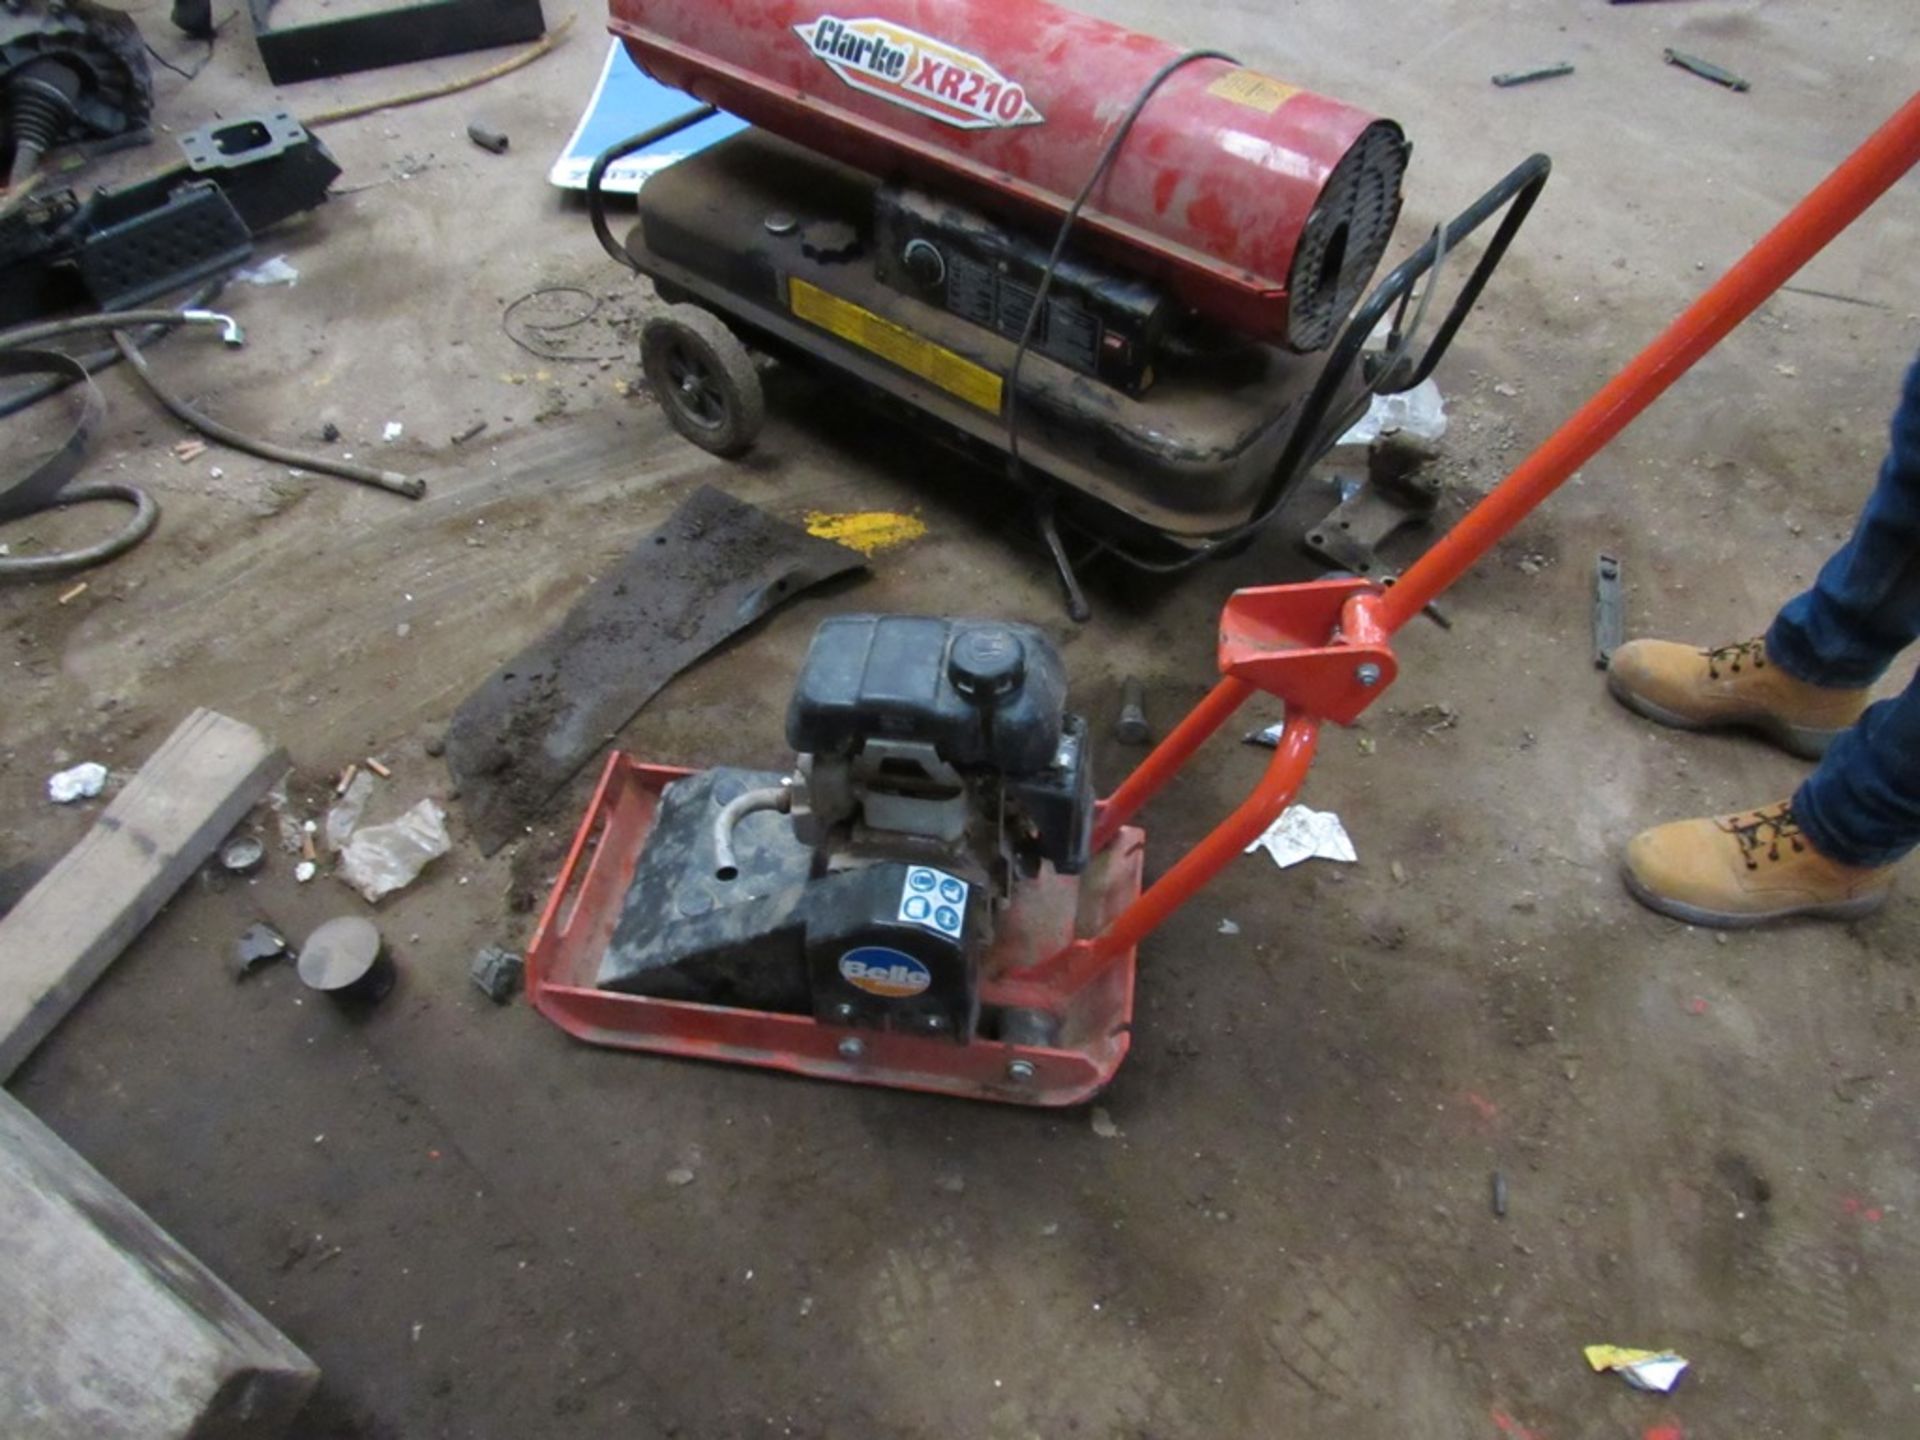 Belle minipack plate compactor with Honda engine